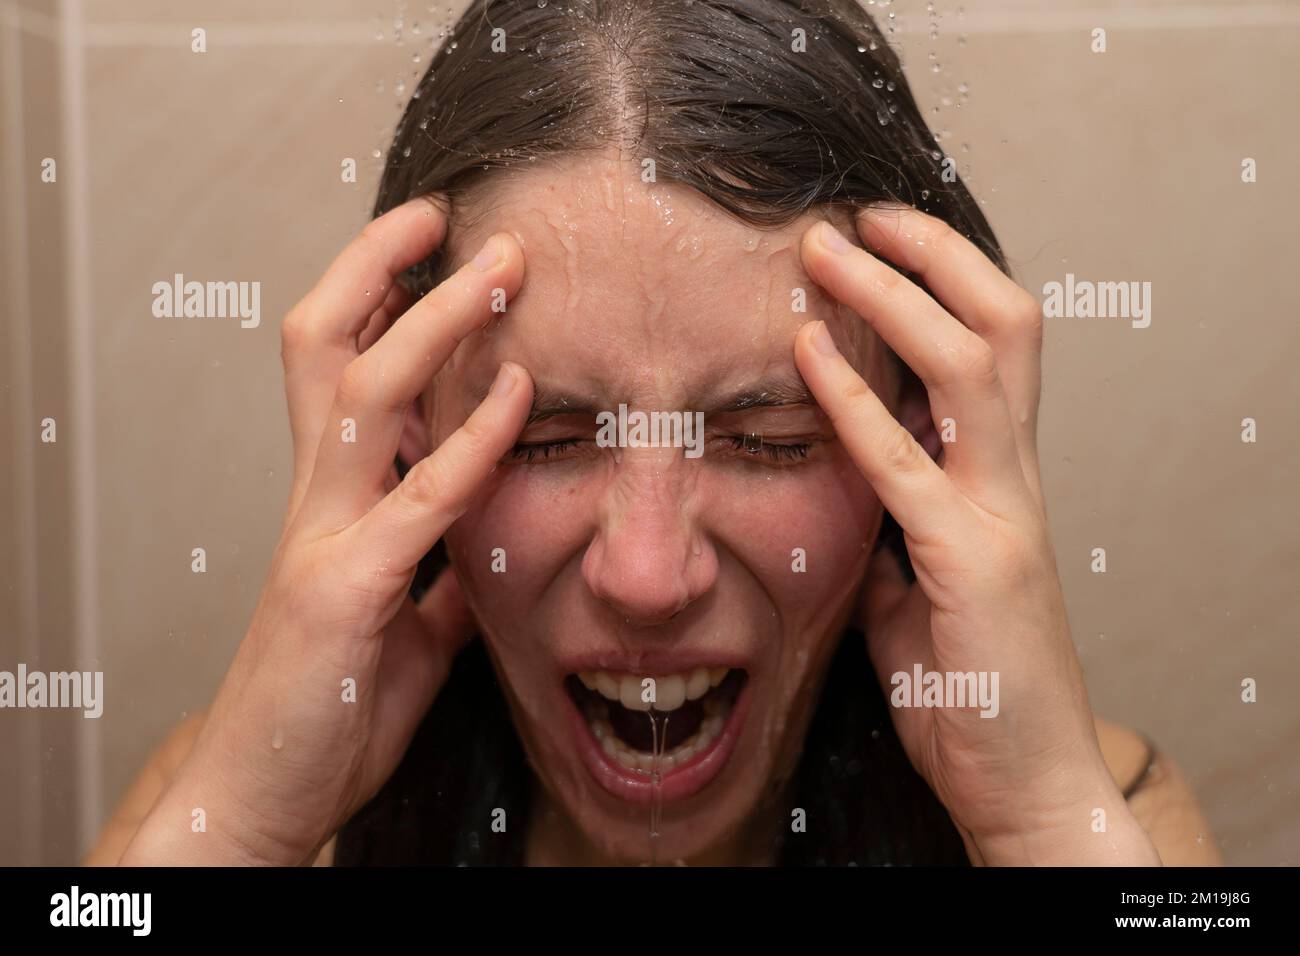 Young woman in shower with water running down her emotional face. Concept: angry, can't take it anymore, mental health problems, modern life stress Stock Photo